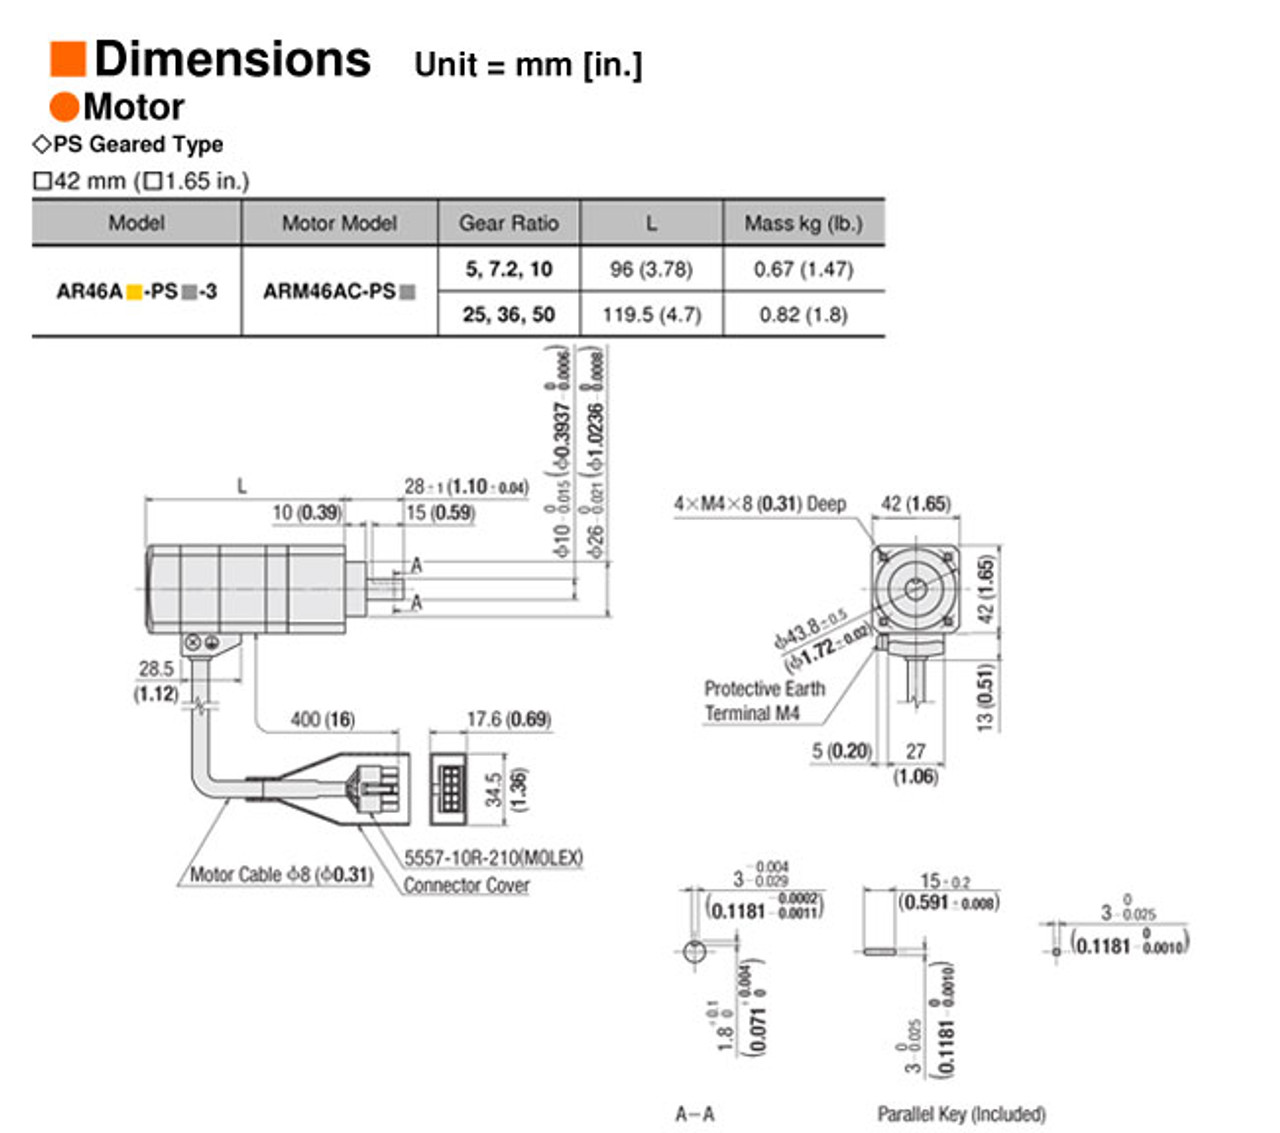 AR46AS-PS36-3 - Dimensions